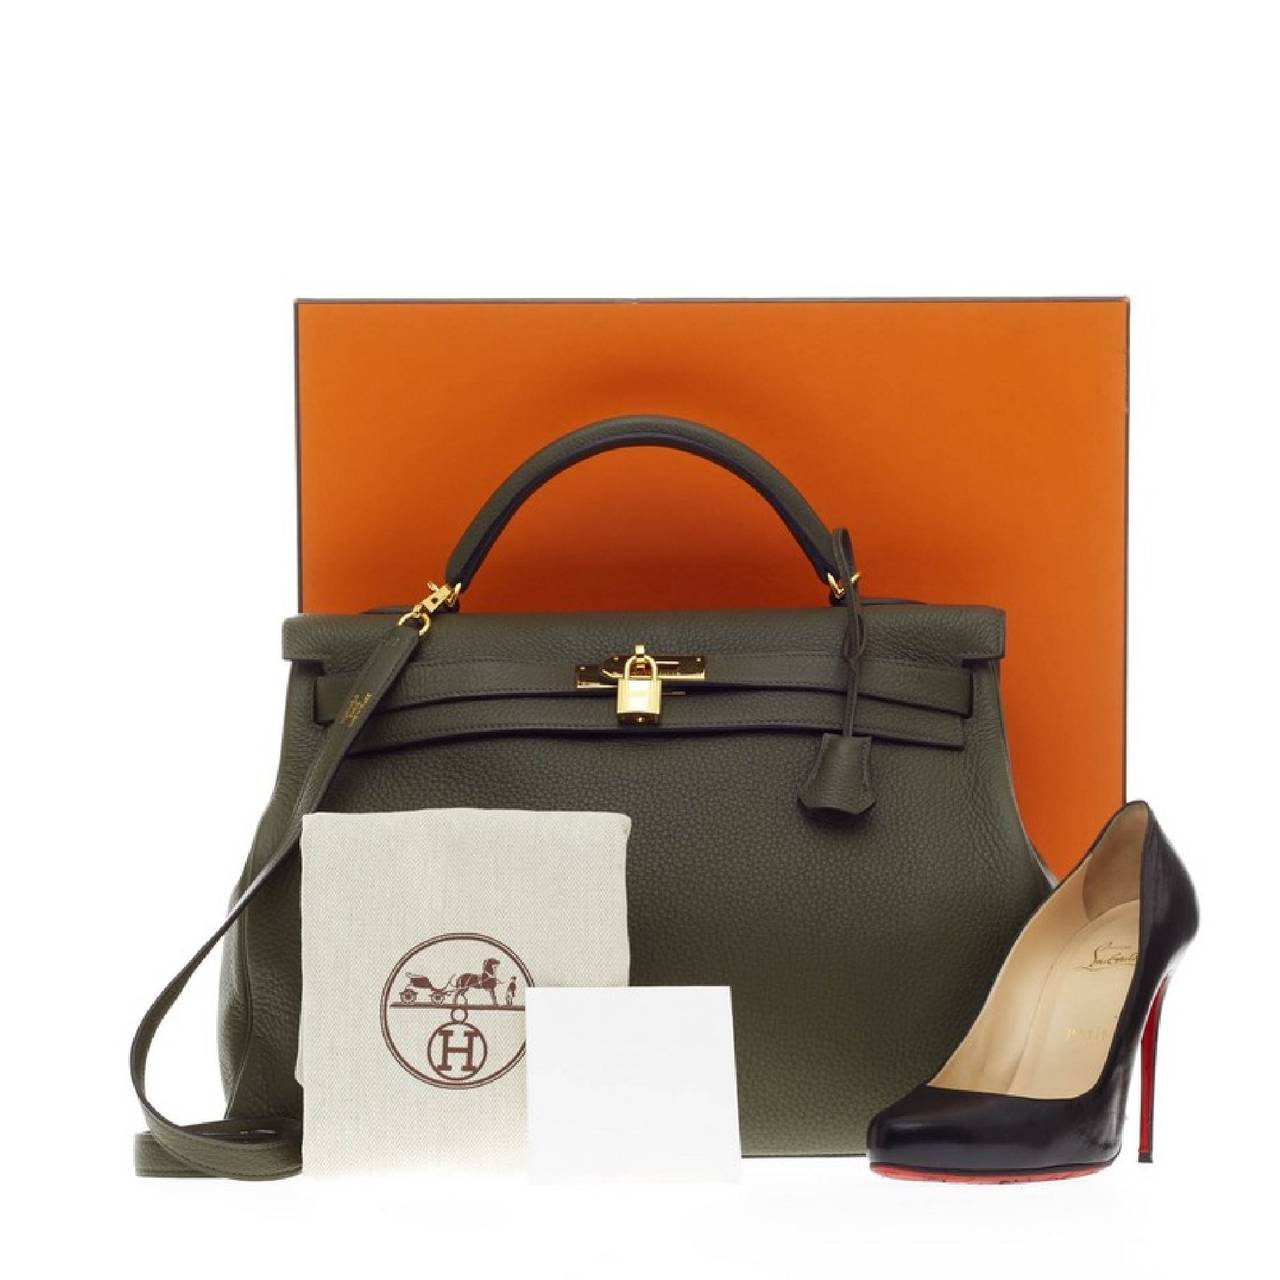 This authentic Hermes Kelly Vert Olive Clemence with Gold Hardware 40 is as classic and timeless as they come. Designed in beautiful vert olive green leather and accented with polished gold hardware, this Kelly showcases Hermes' beautiful